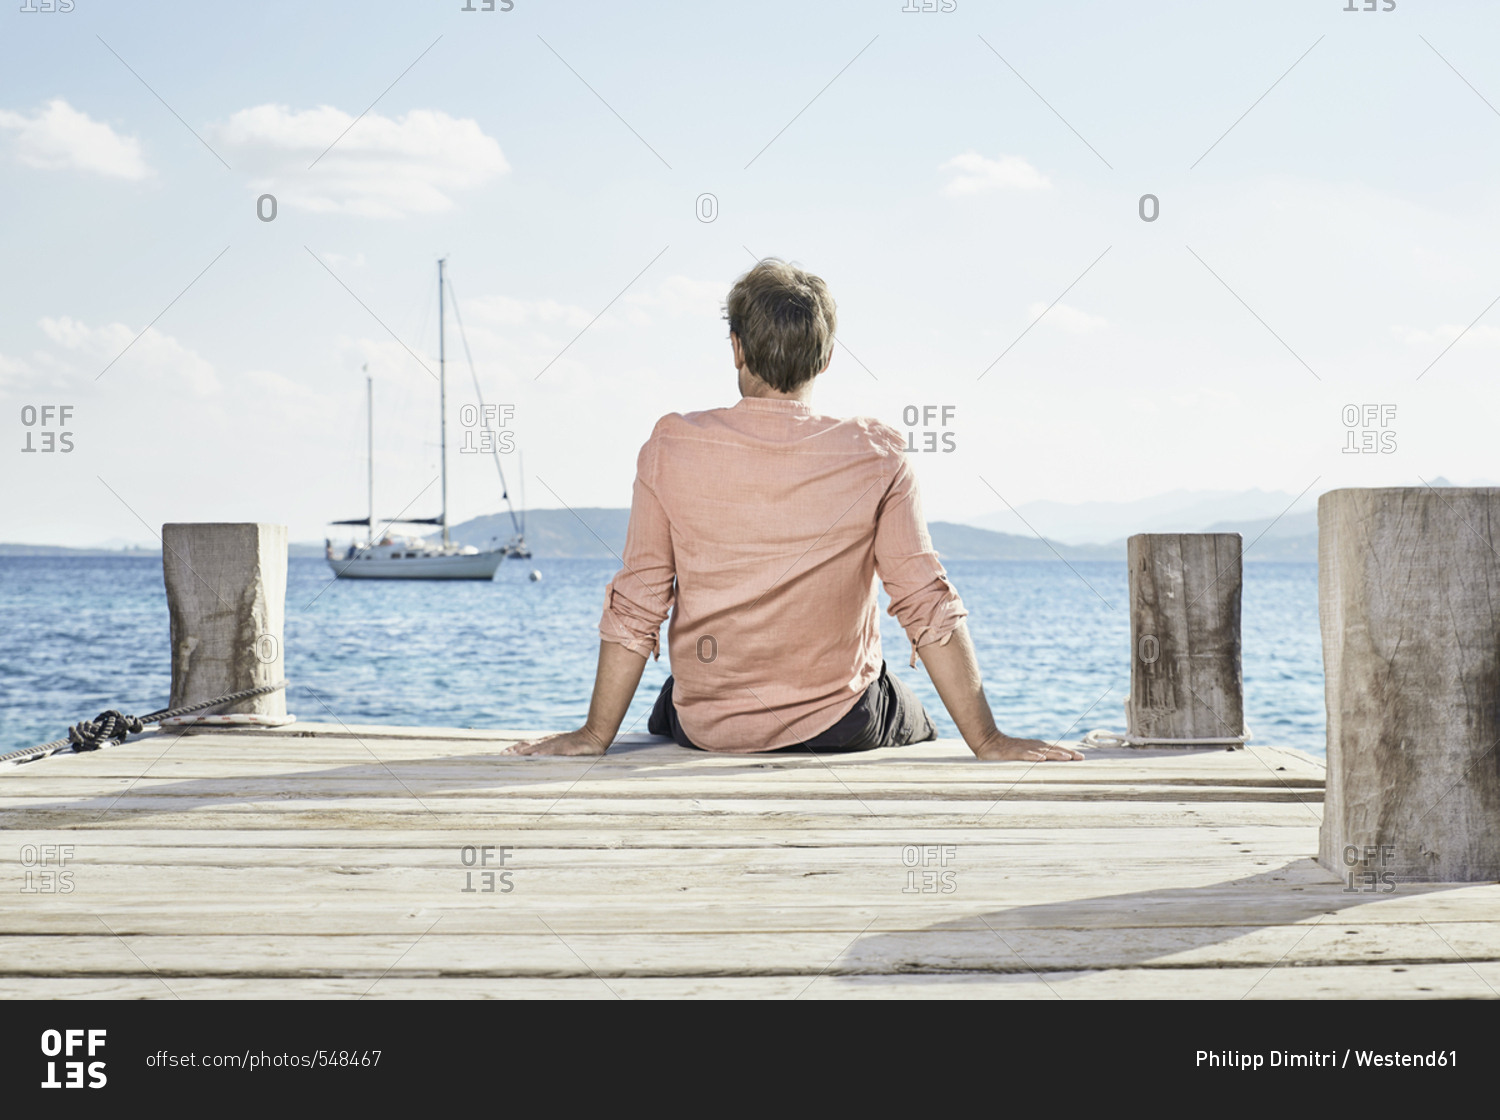 Back view of man sitting on jetty looking at distance